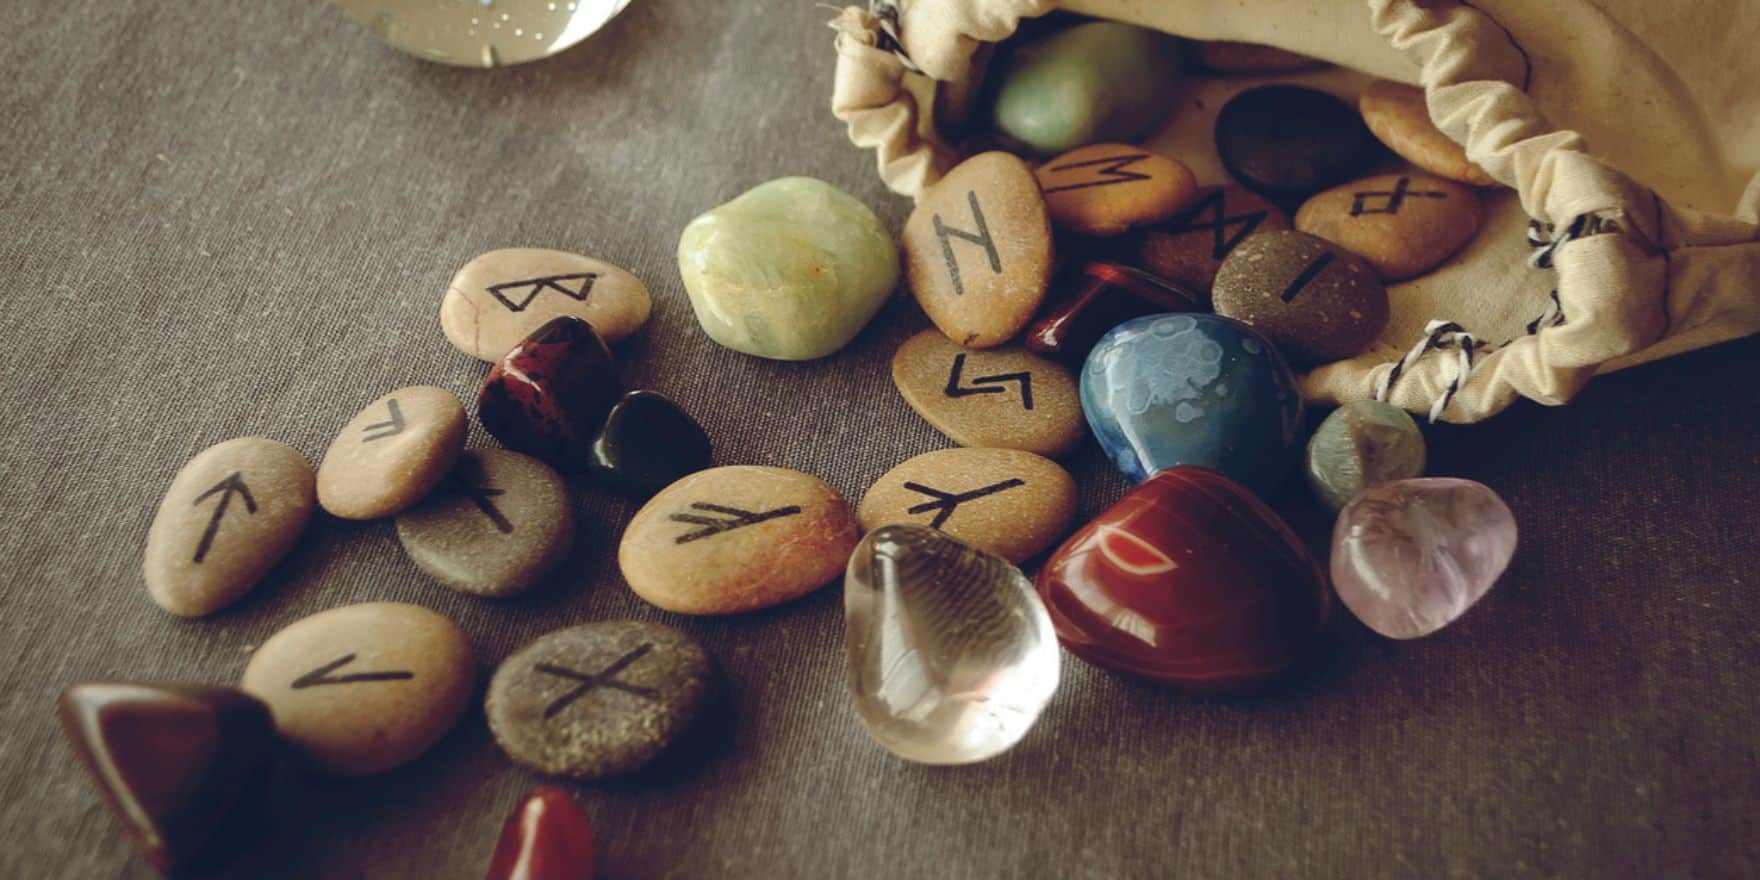 Rune Meanings: Getting To Know The Elder Futhark